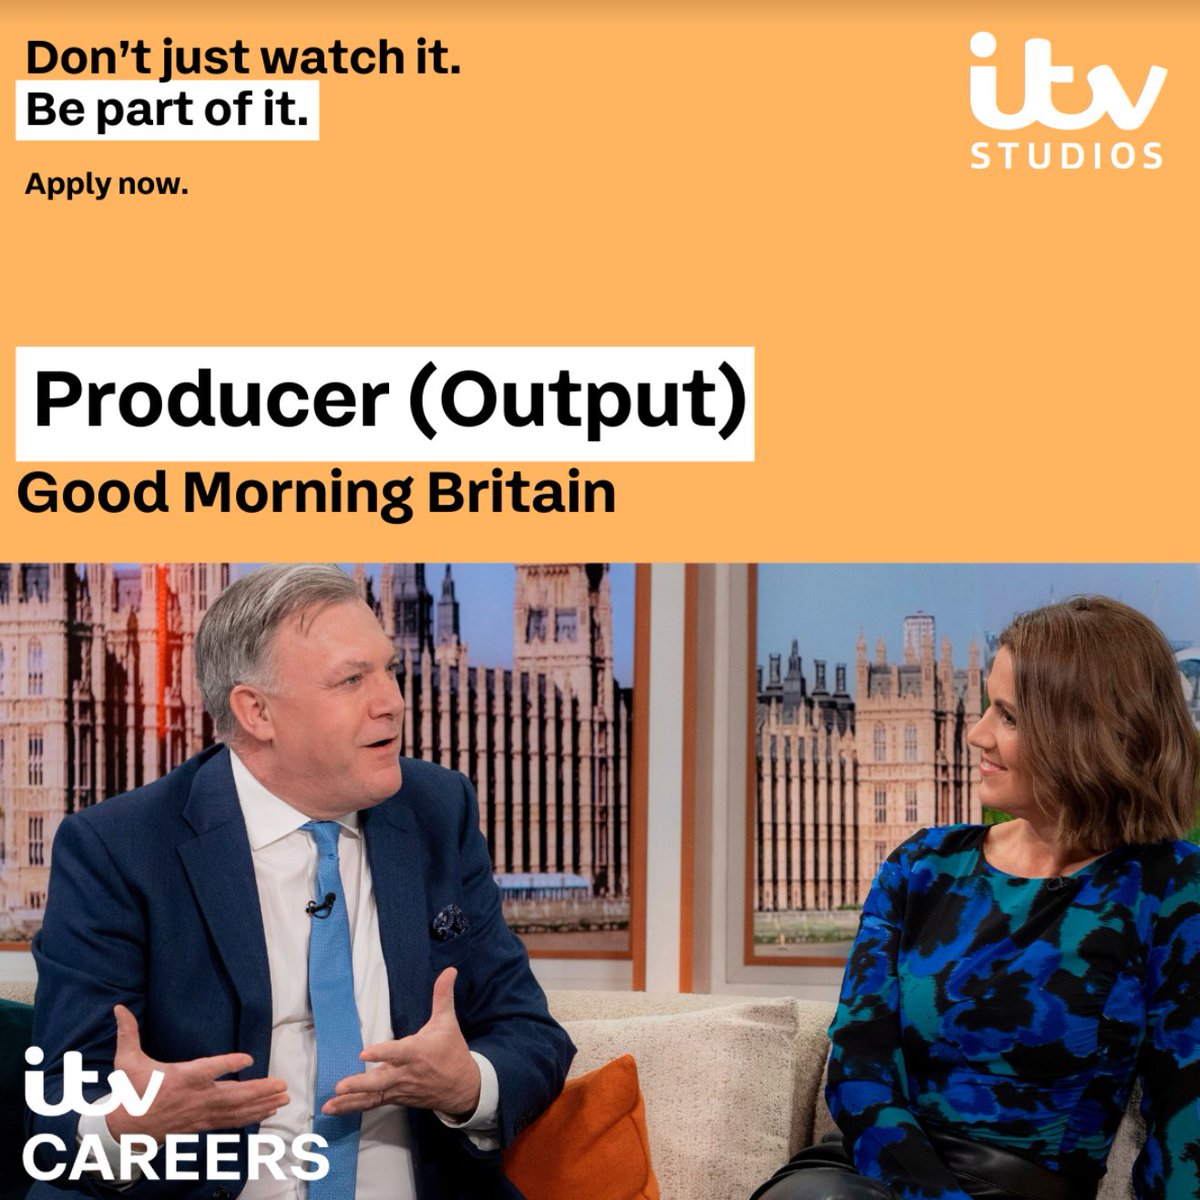 We have an unmissable opportunity to join our team at Good Morning Britain as an Output Producer. Apply now: lhrc1a.rfer.us/ITVhHF4up 🌐 itvjobs.com 📷 www.daytimetalent@itv.com Closing date for applications: Monday 29th April #ITVCareers #producerroles